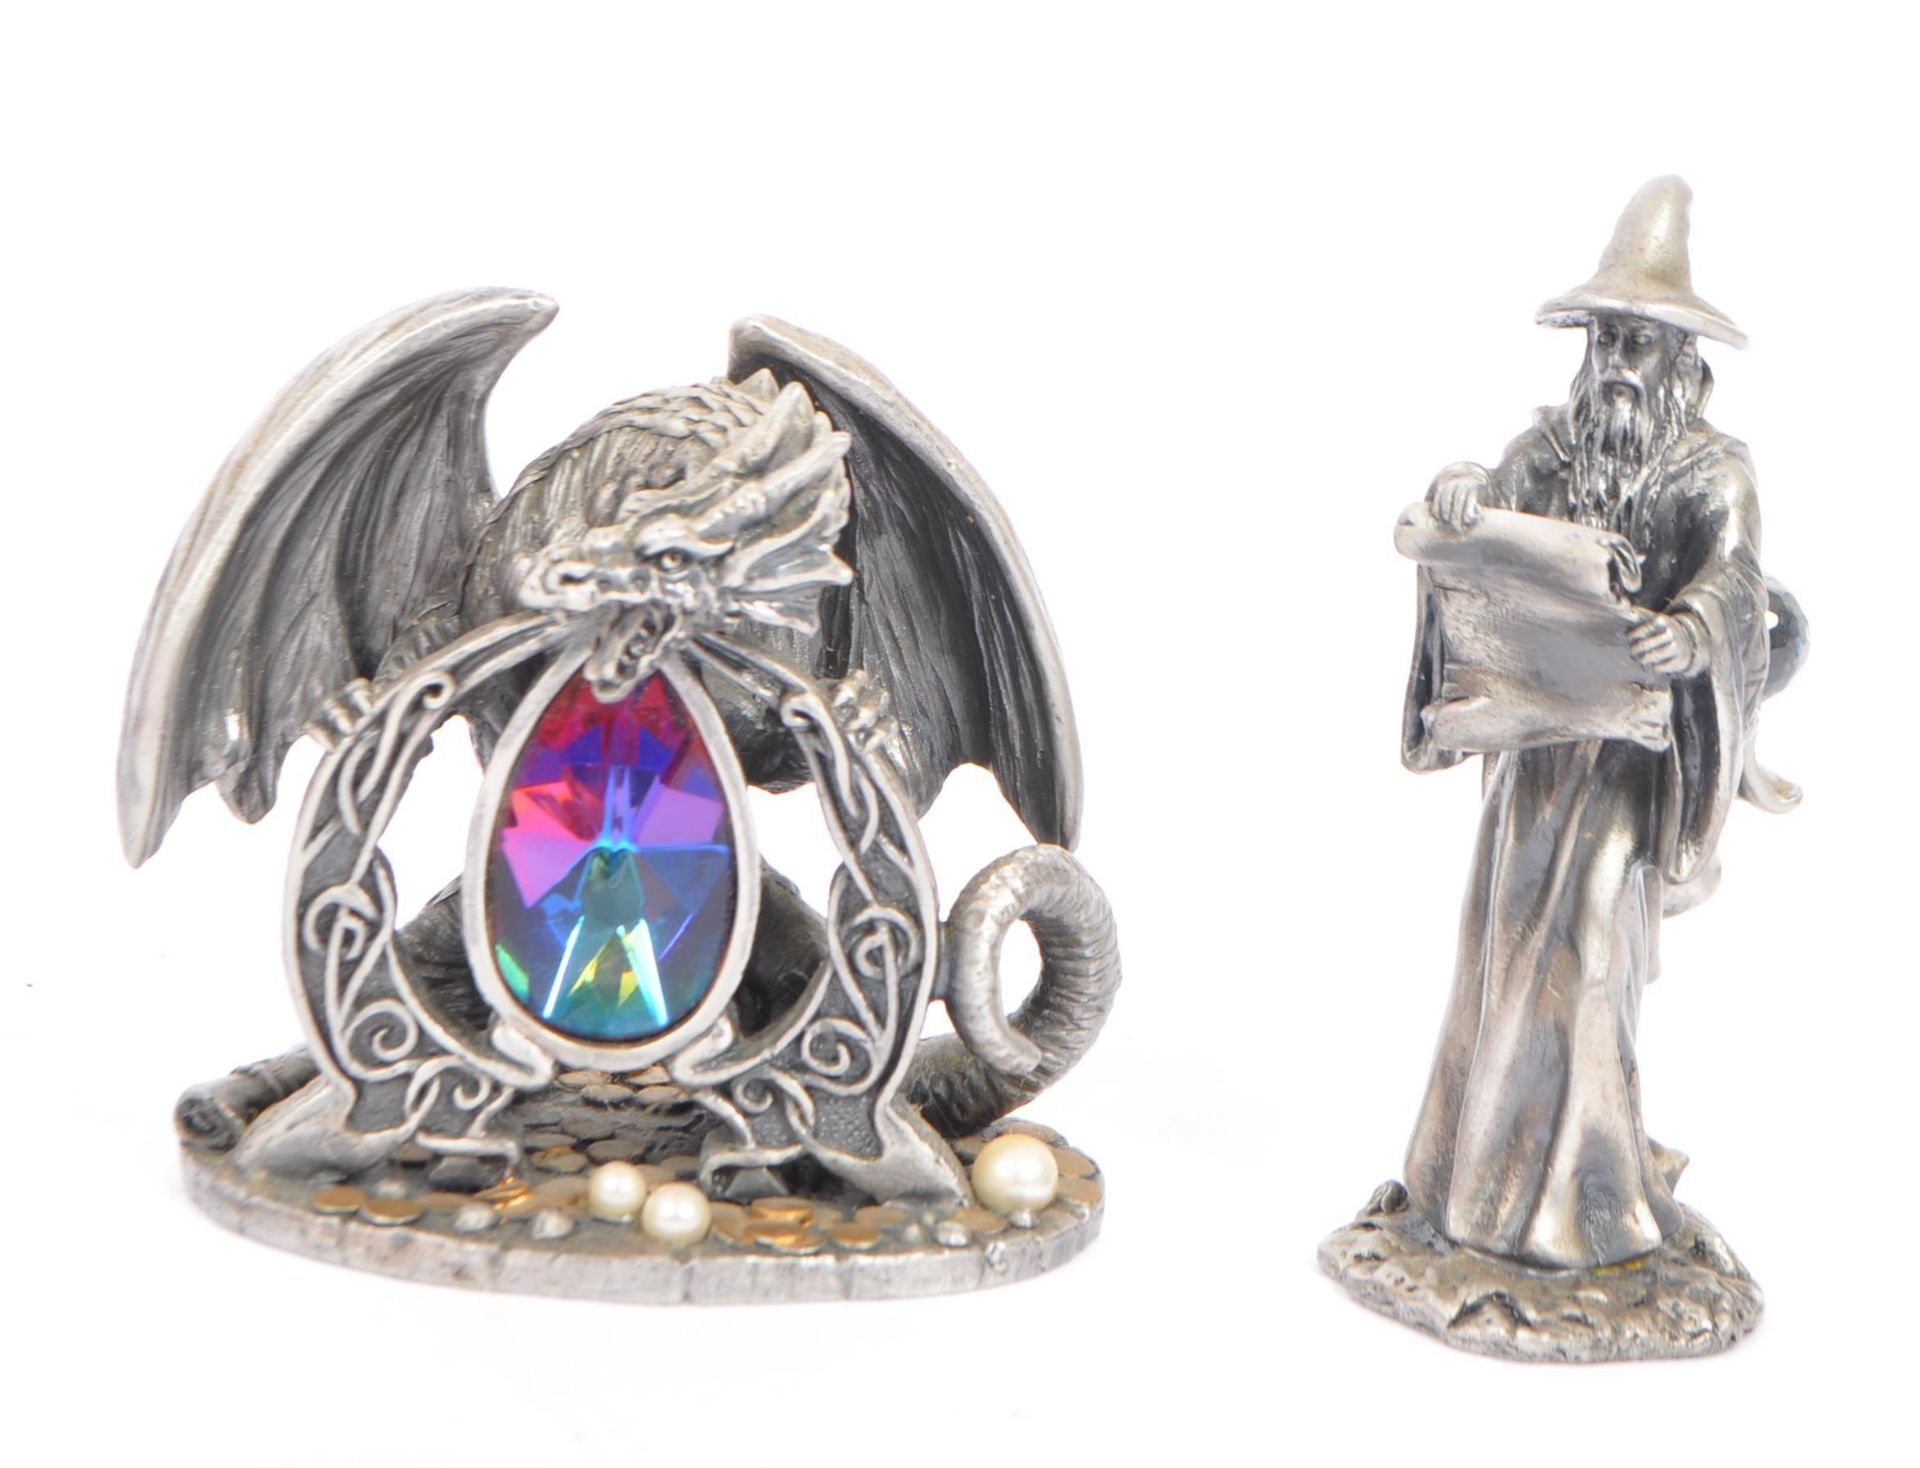 FIVE PEWTER TOLKIEN FIGURINES BY WAPW / SC WARD & SC RILEY - Image 3 of 7